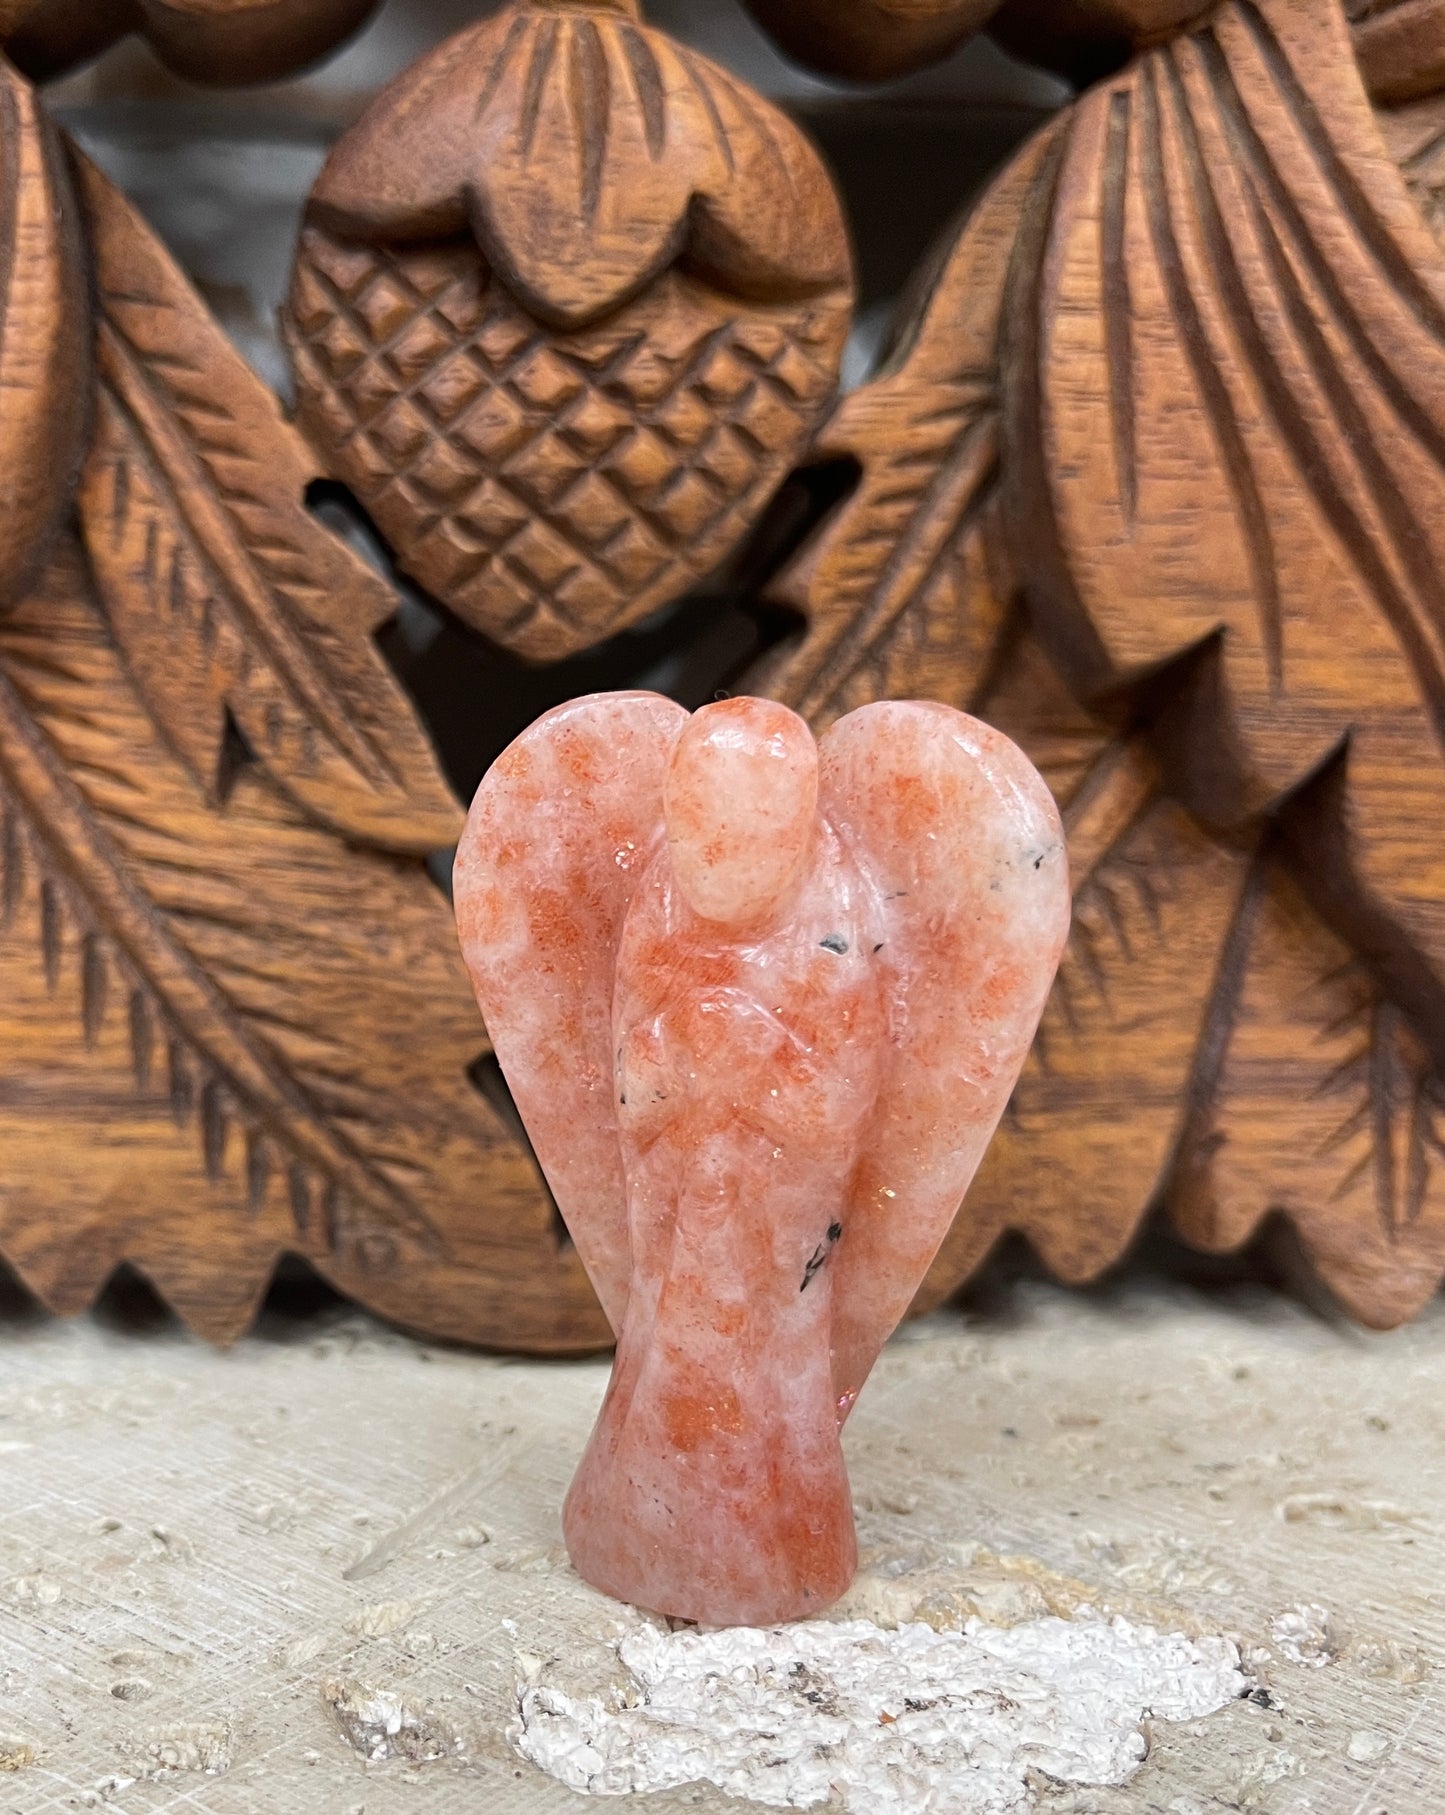 Carved Sunstone Angels from India